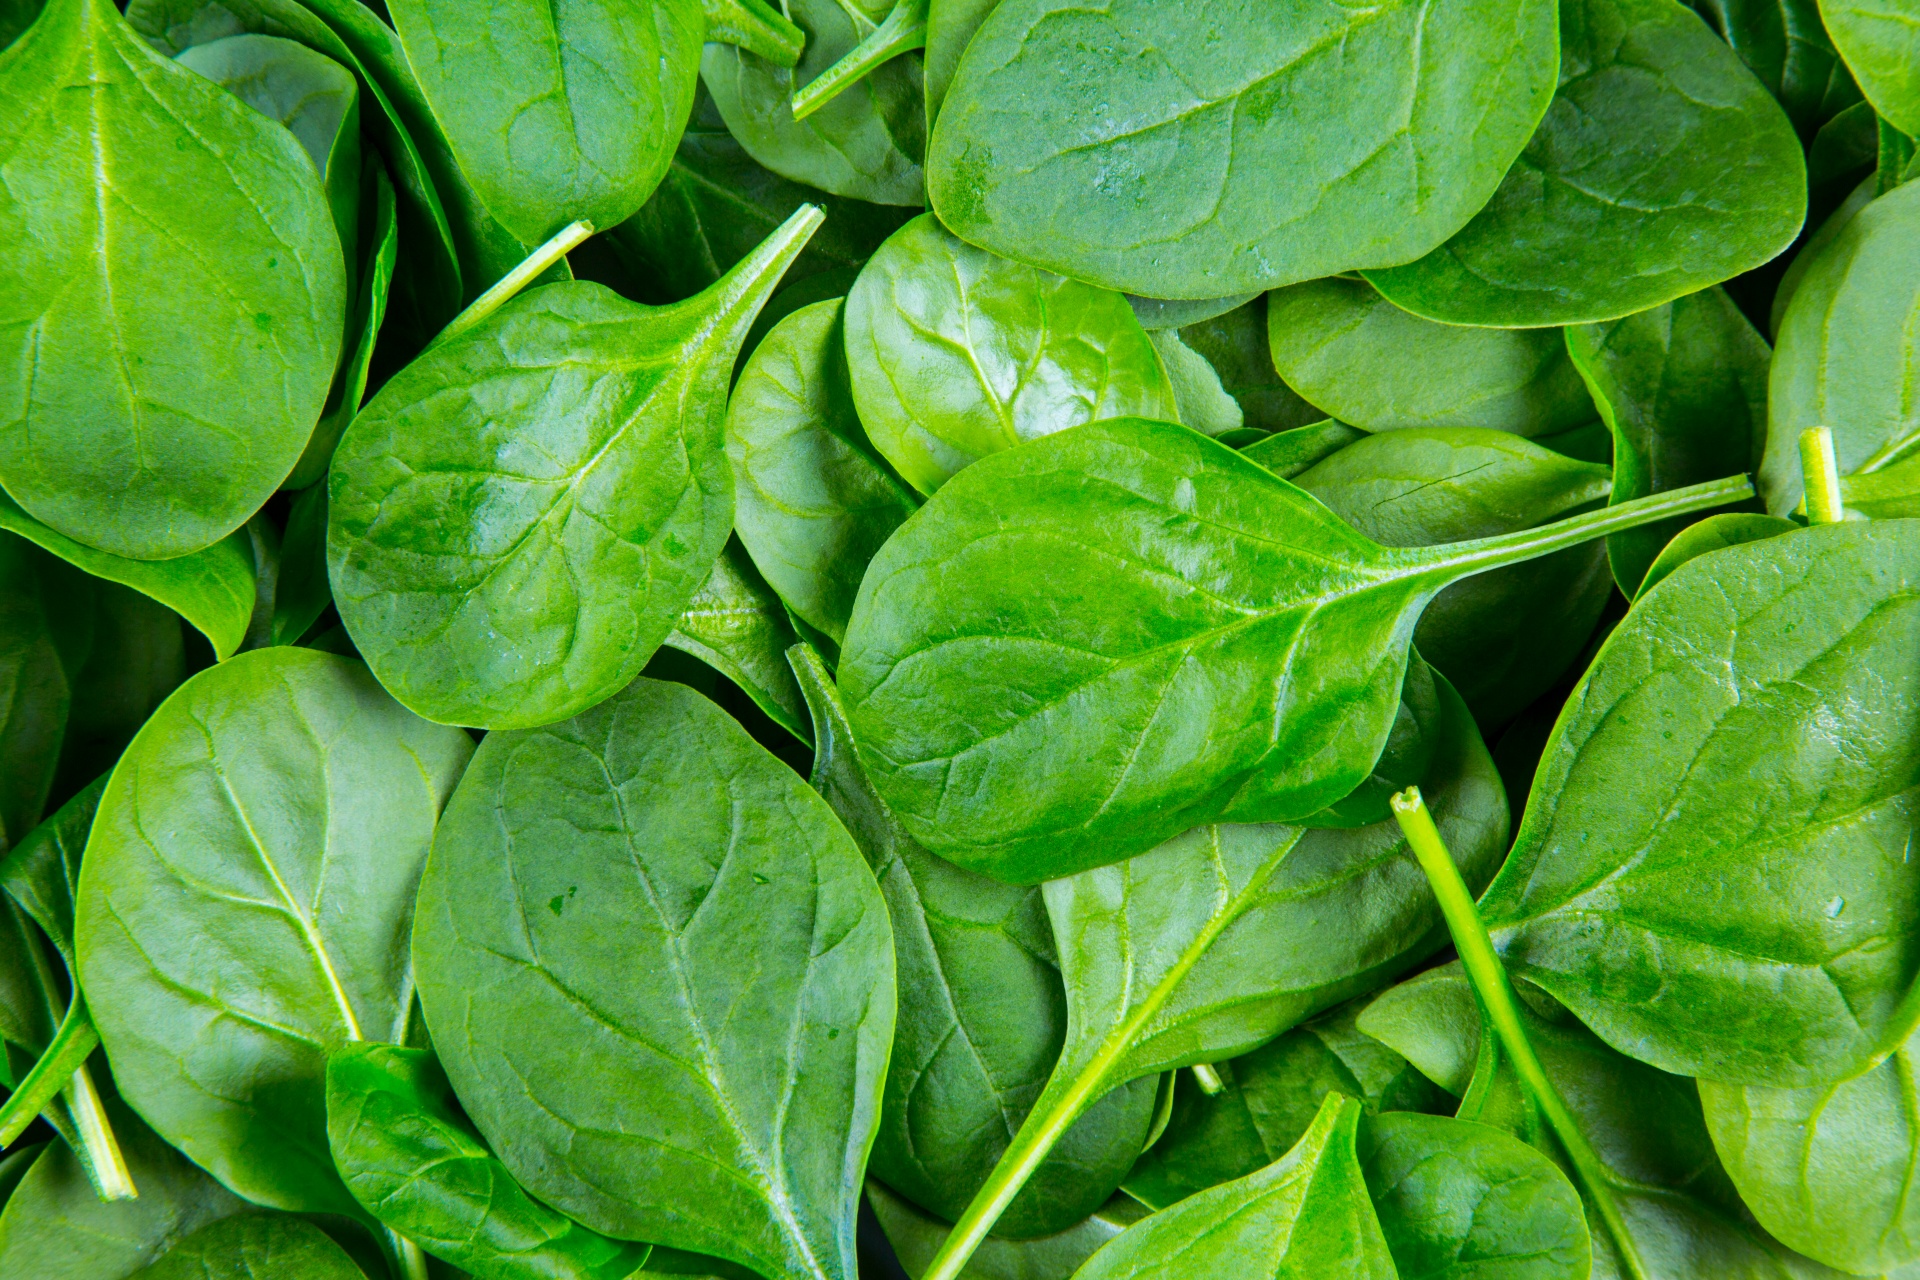 Superfood: Spinach